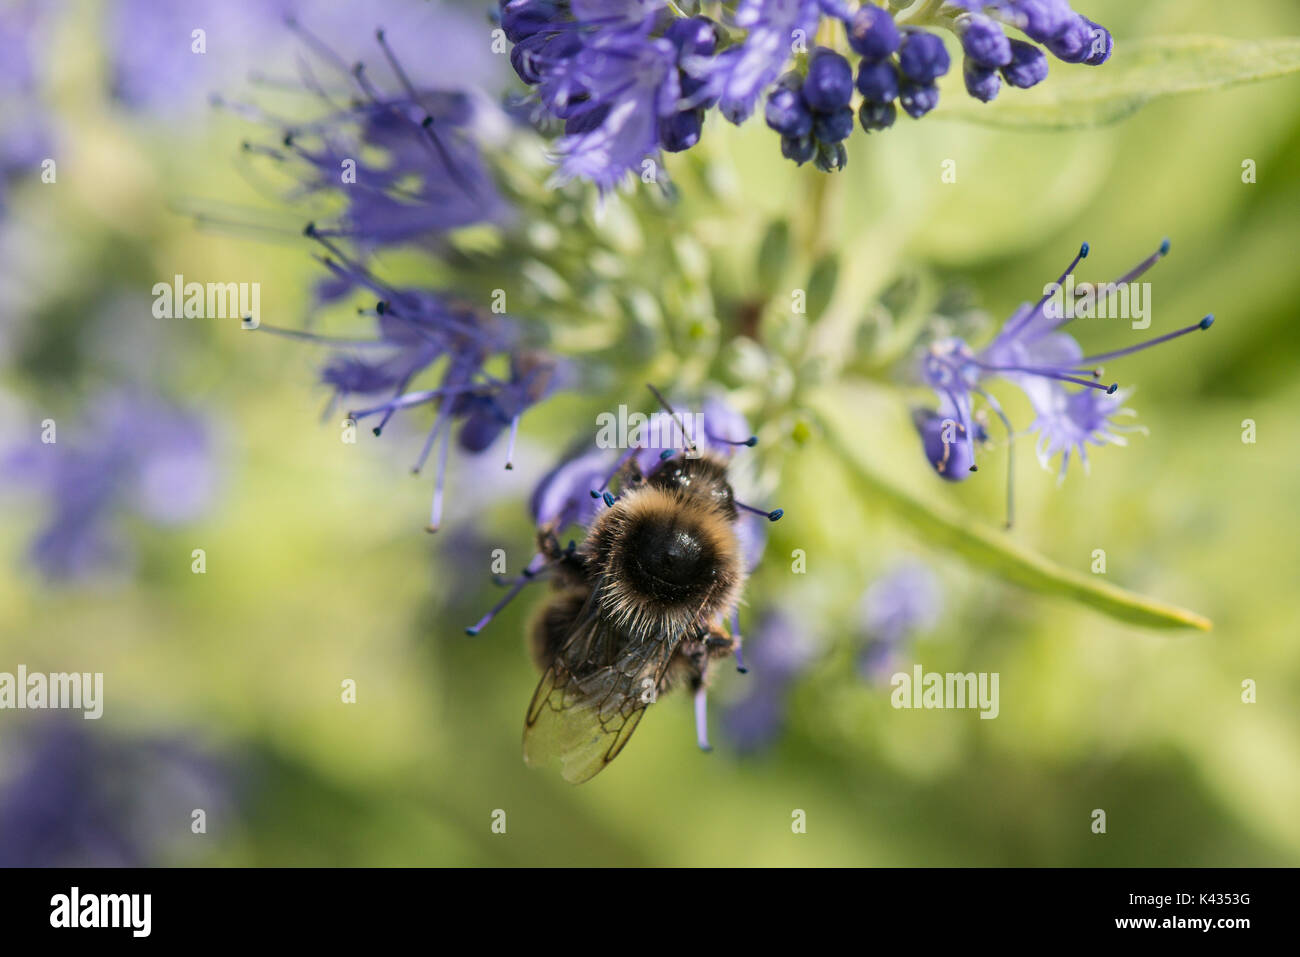 Bees on bluebeard Worcester Gold (Caryopteris × clandonensis) Stock Photo